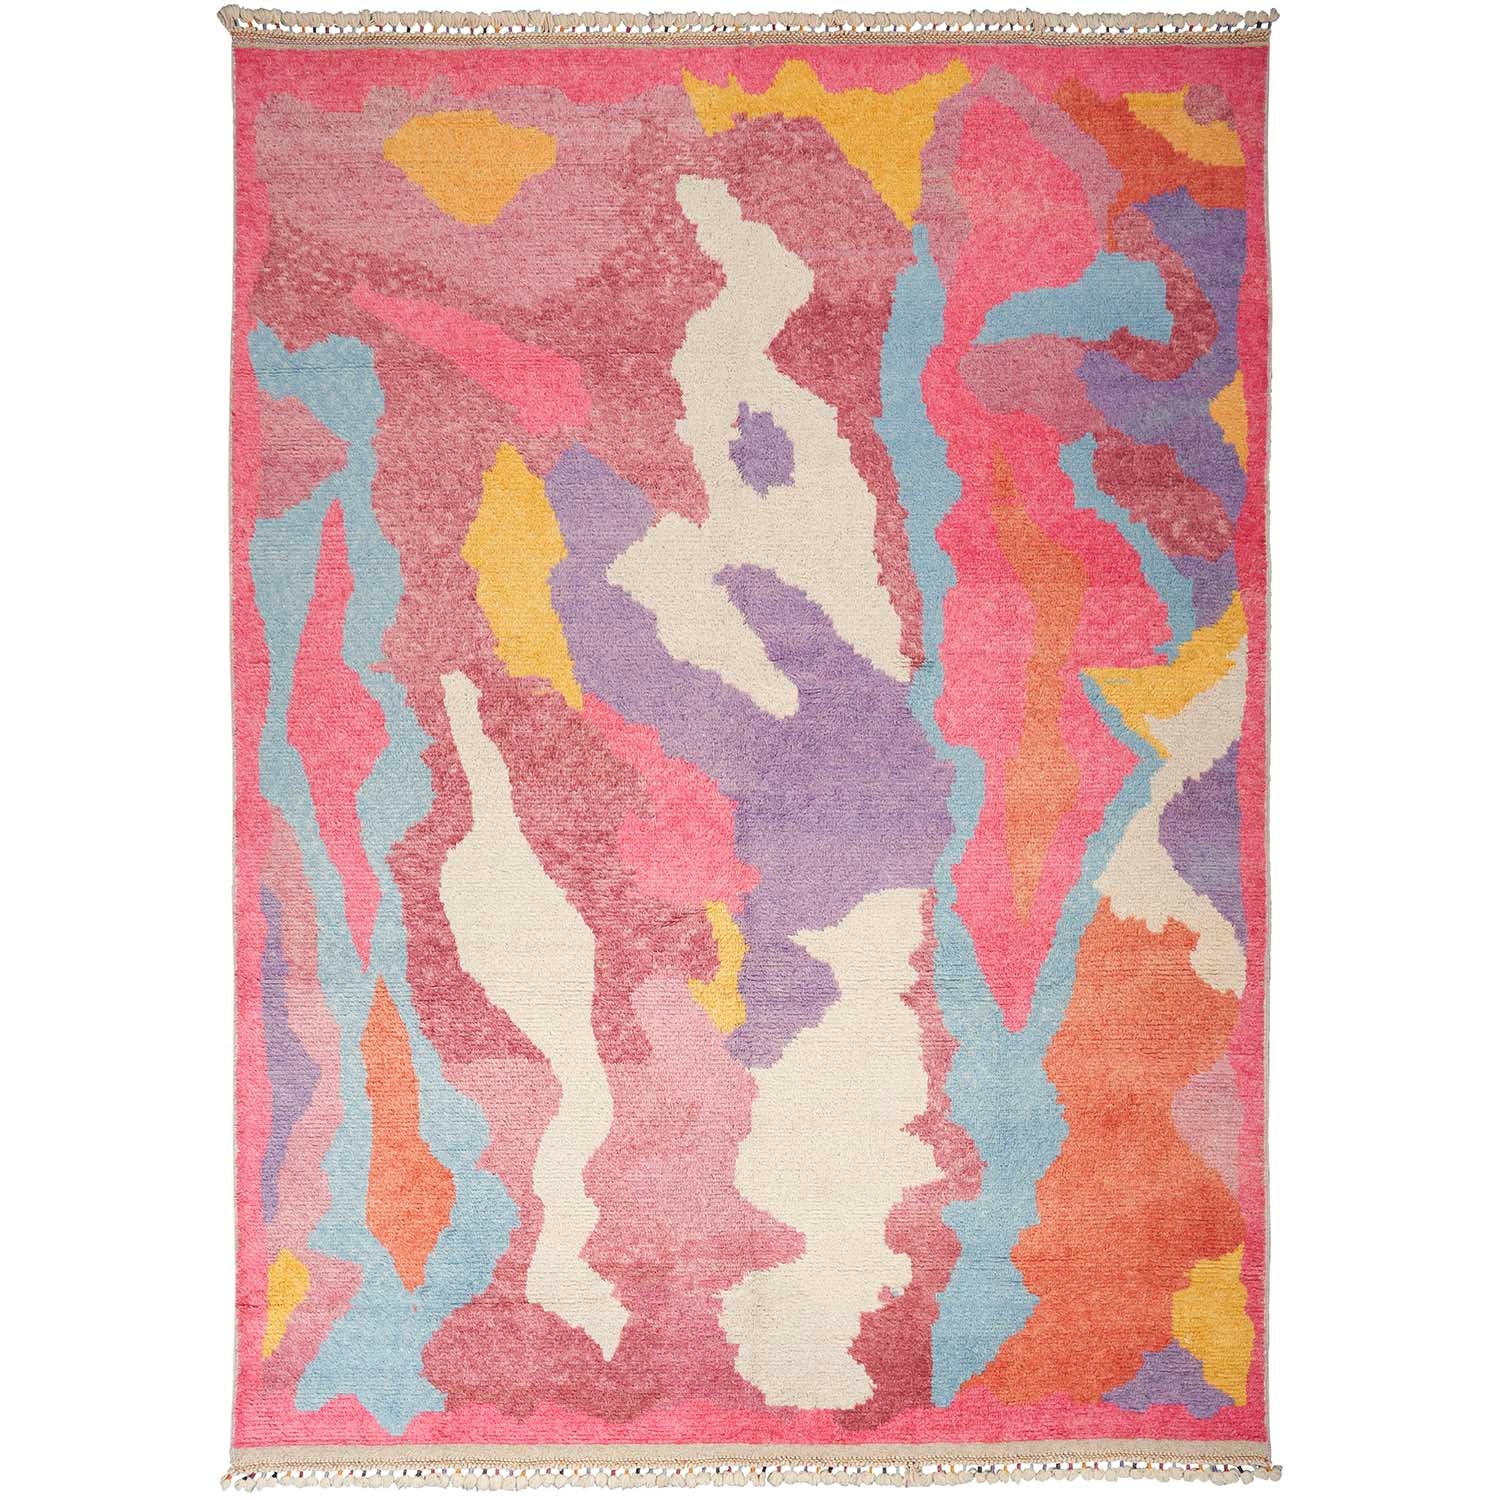 Vibrant hand-woven area rug with abstract interlocking shapes and fringe.